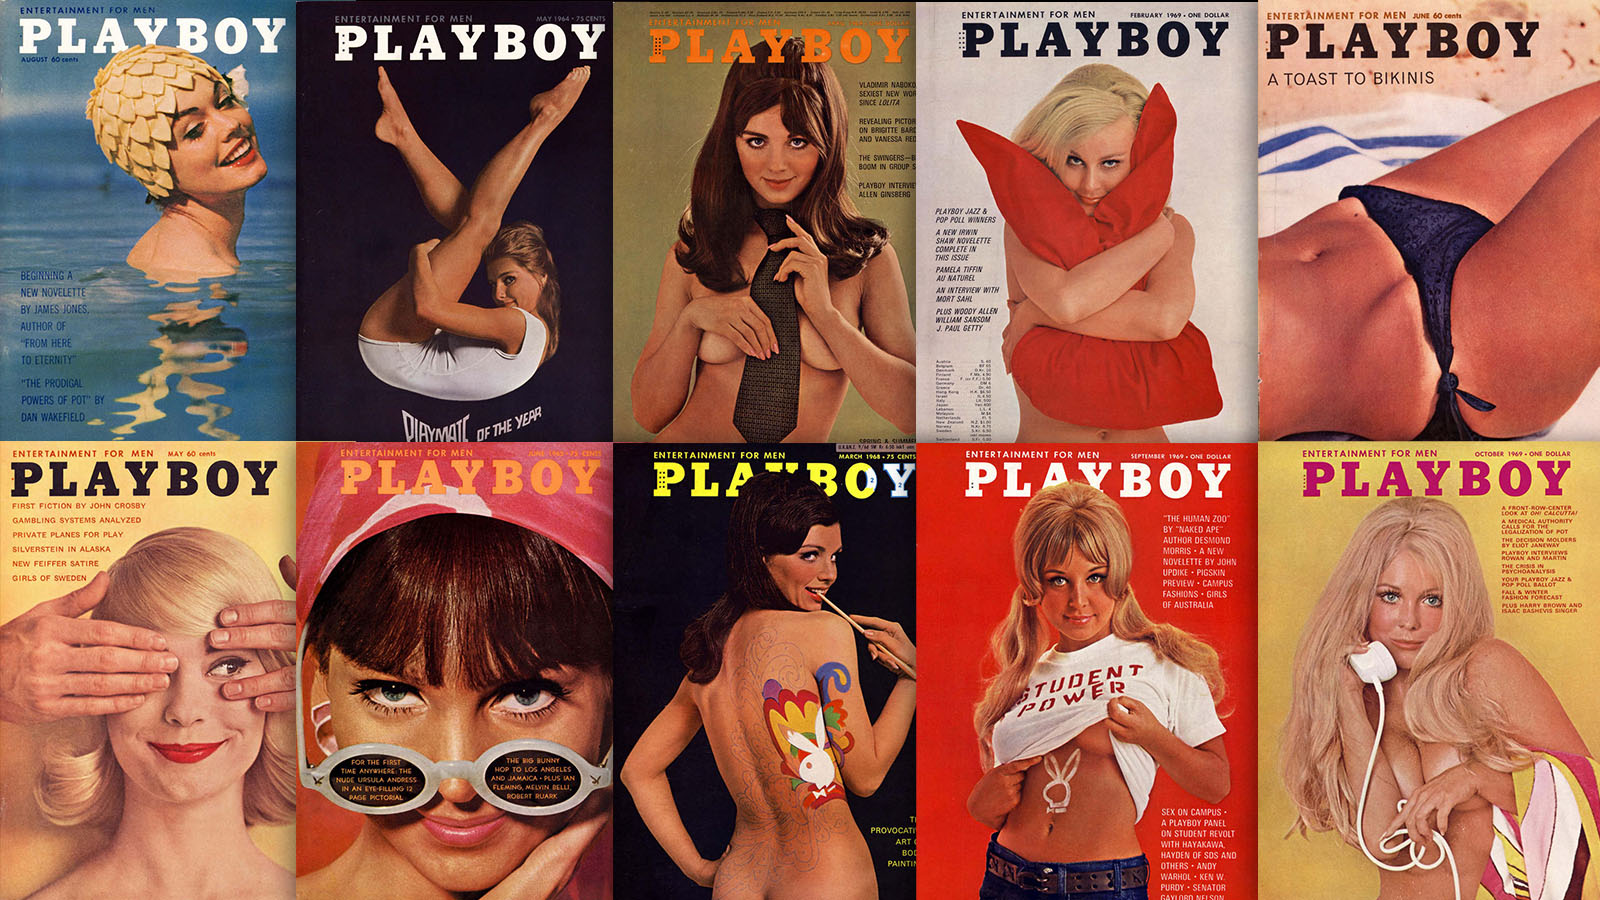 Playboy Finally Did It! , Download The Complete Playboy Digital Magazine Collection (1953 - 2020) 15